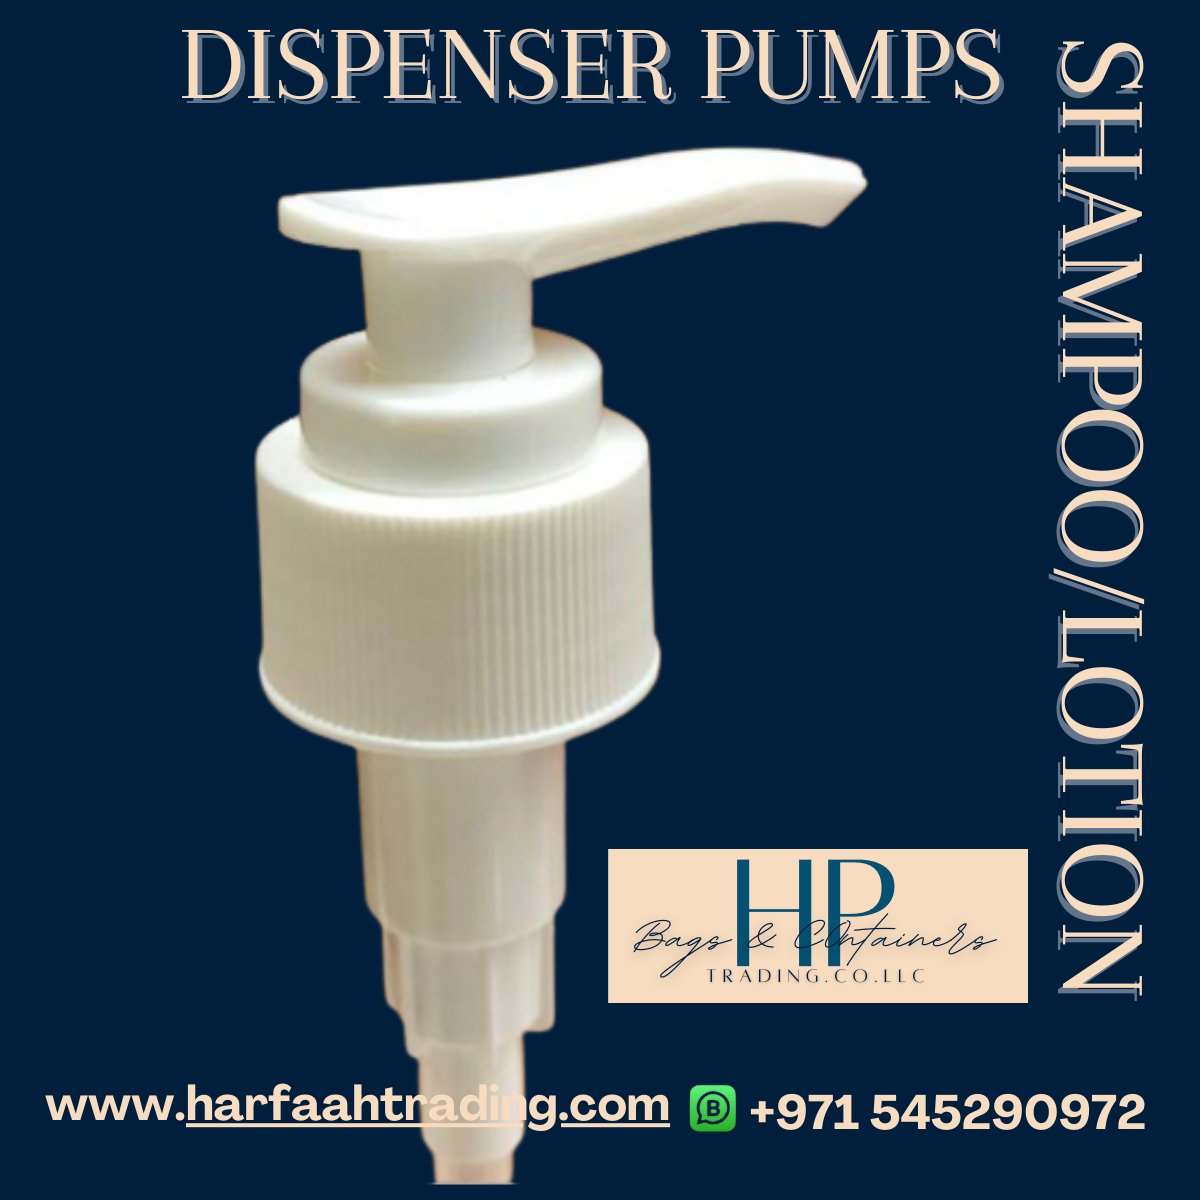 HIGH QUALITY LONG-LASTING LOTION PUMP
On-Off Lotion Pump (24/410 & 28/410)
FOR MORE DETAILS CONTACT US👇
📞 👉wa.me/971545290972
✉️ 👉  harfaahtrading.com
#harfaahpackaging #bottle #lotionpump #packaging #cosmetics #pumps #beauty  #cosmeticpump #skincare